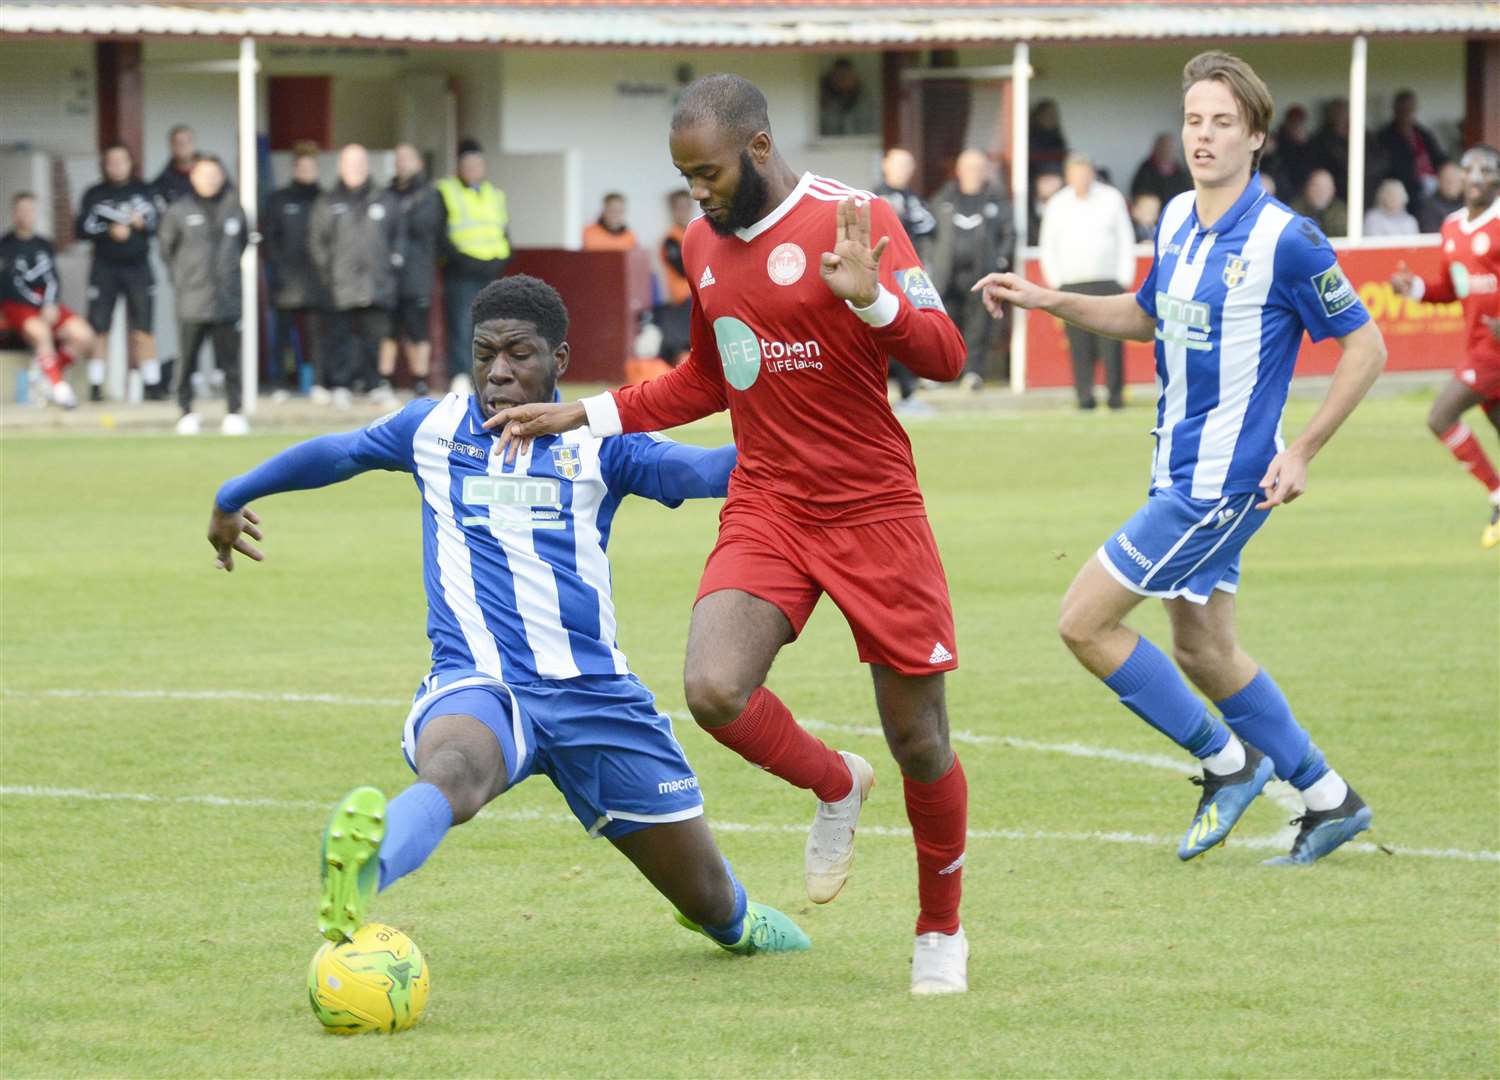 Zak Ansah has been unstoppable since signing for Hythe Picture: Paul Amos